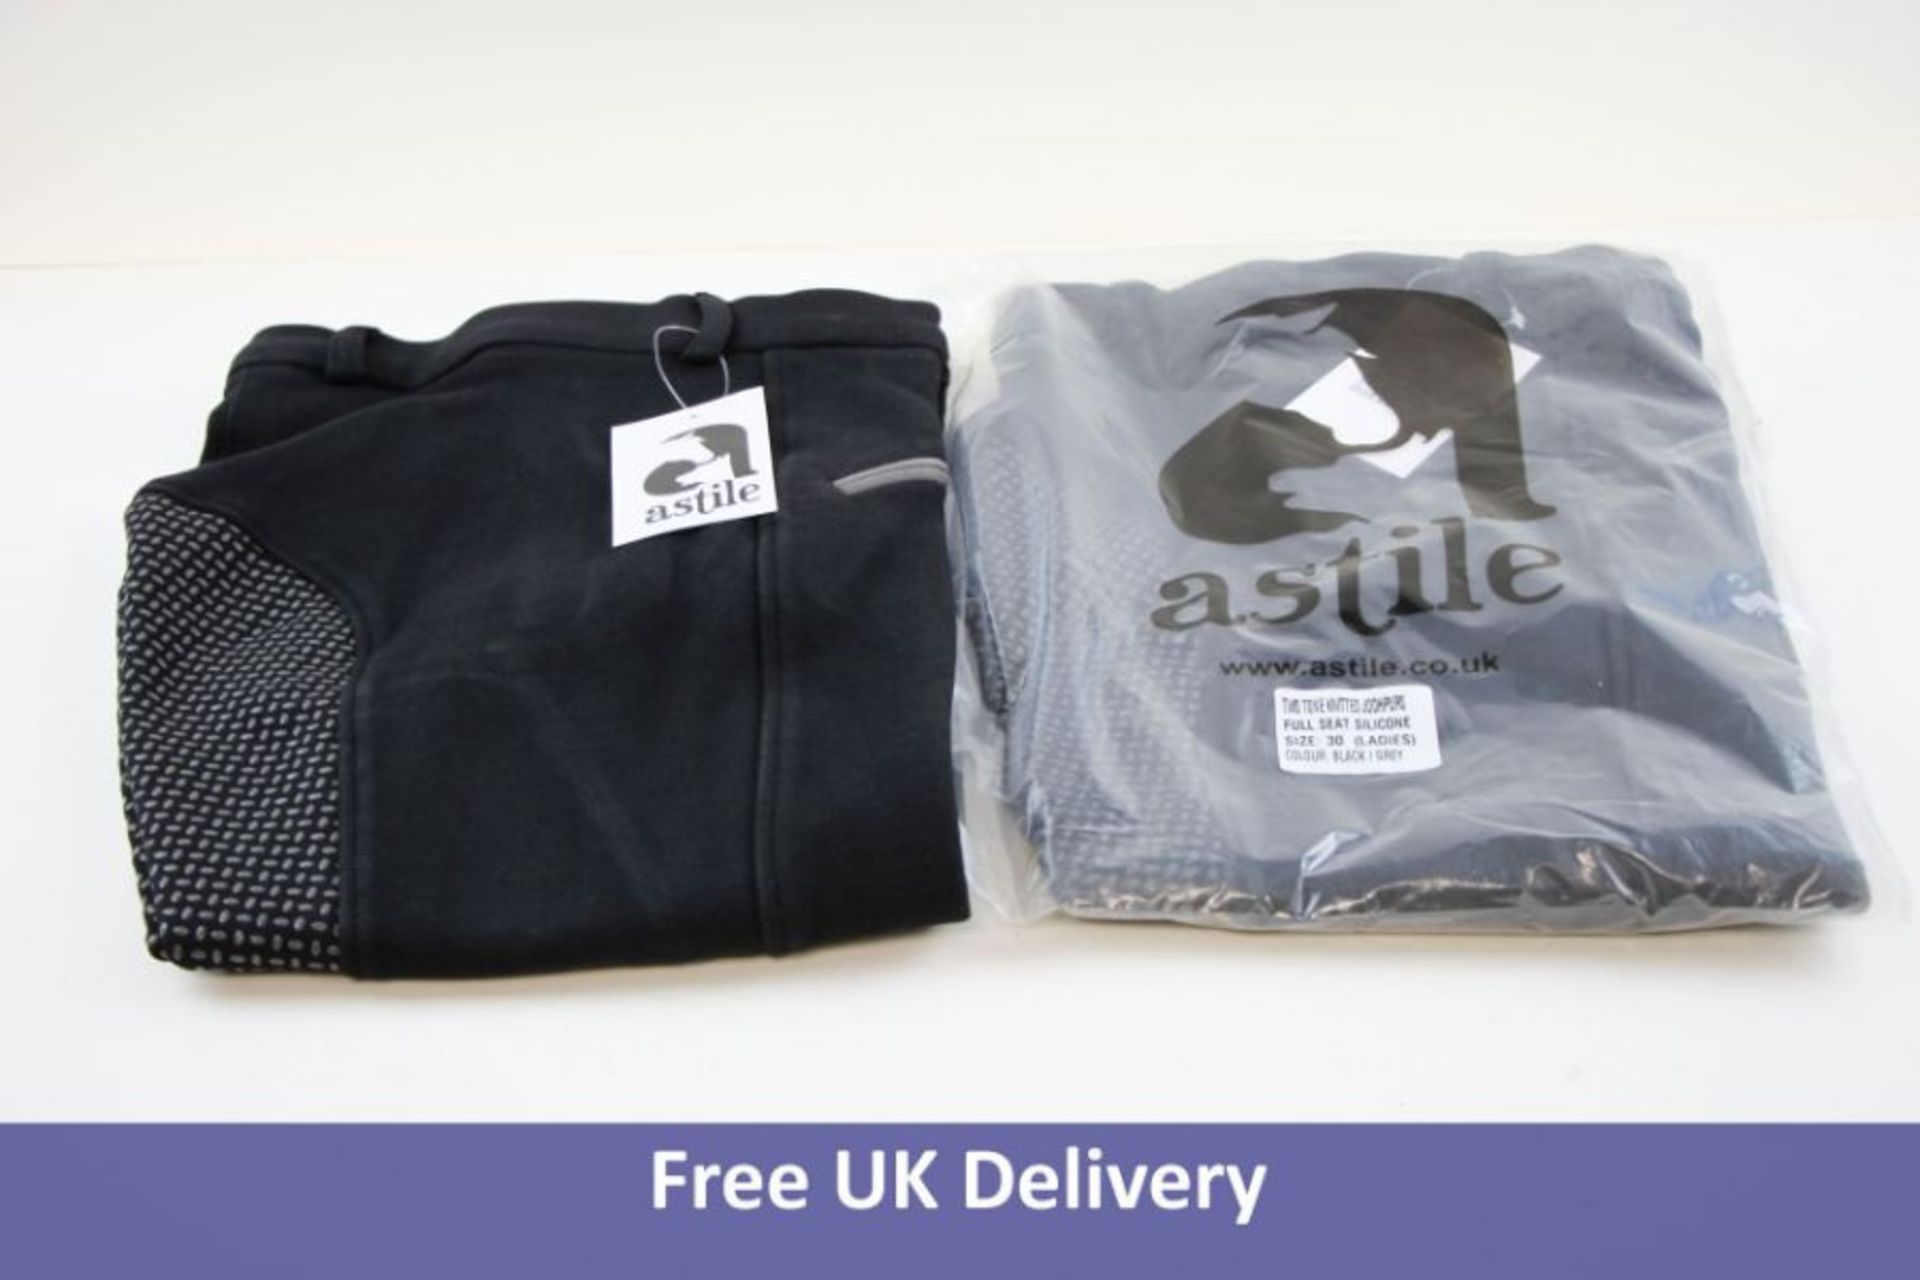 Two Pairs of Astile Women's Equestrian Riding Trousers, Full Seat Silicone, Black and Grey, Size 28